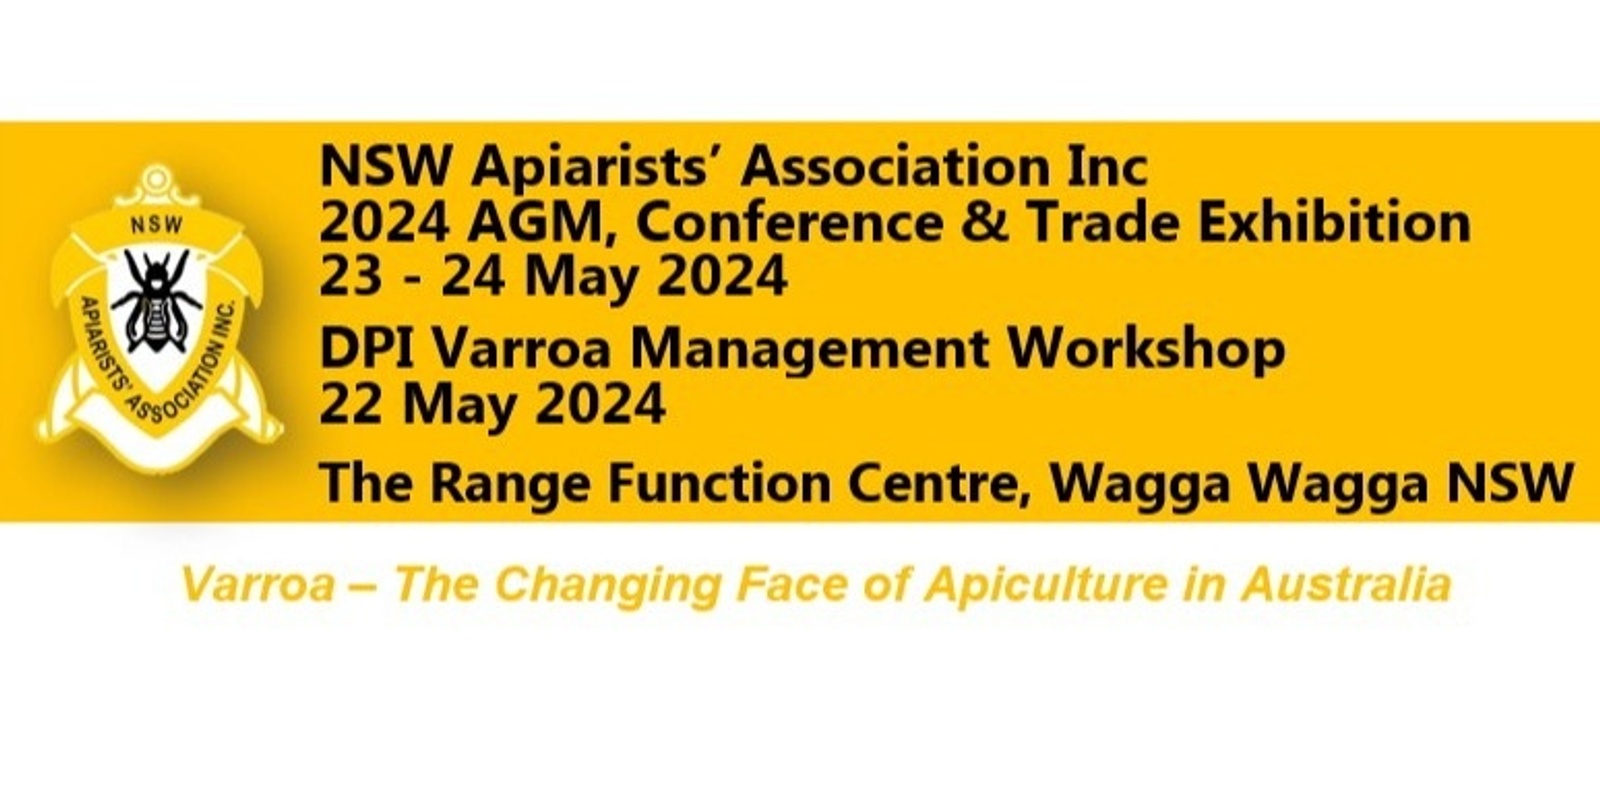 Banner image for 2024 NSW Apiarists' Association AGM, Conference & Trade Exhibition & DPI Varroa Management Workshop